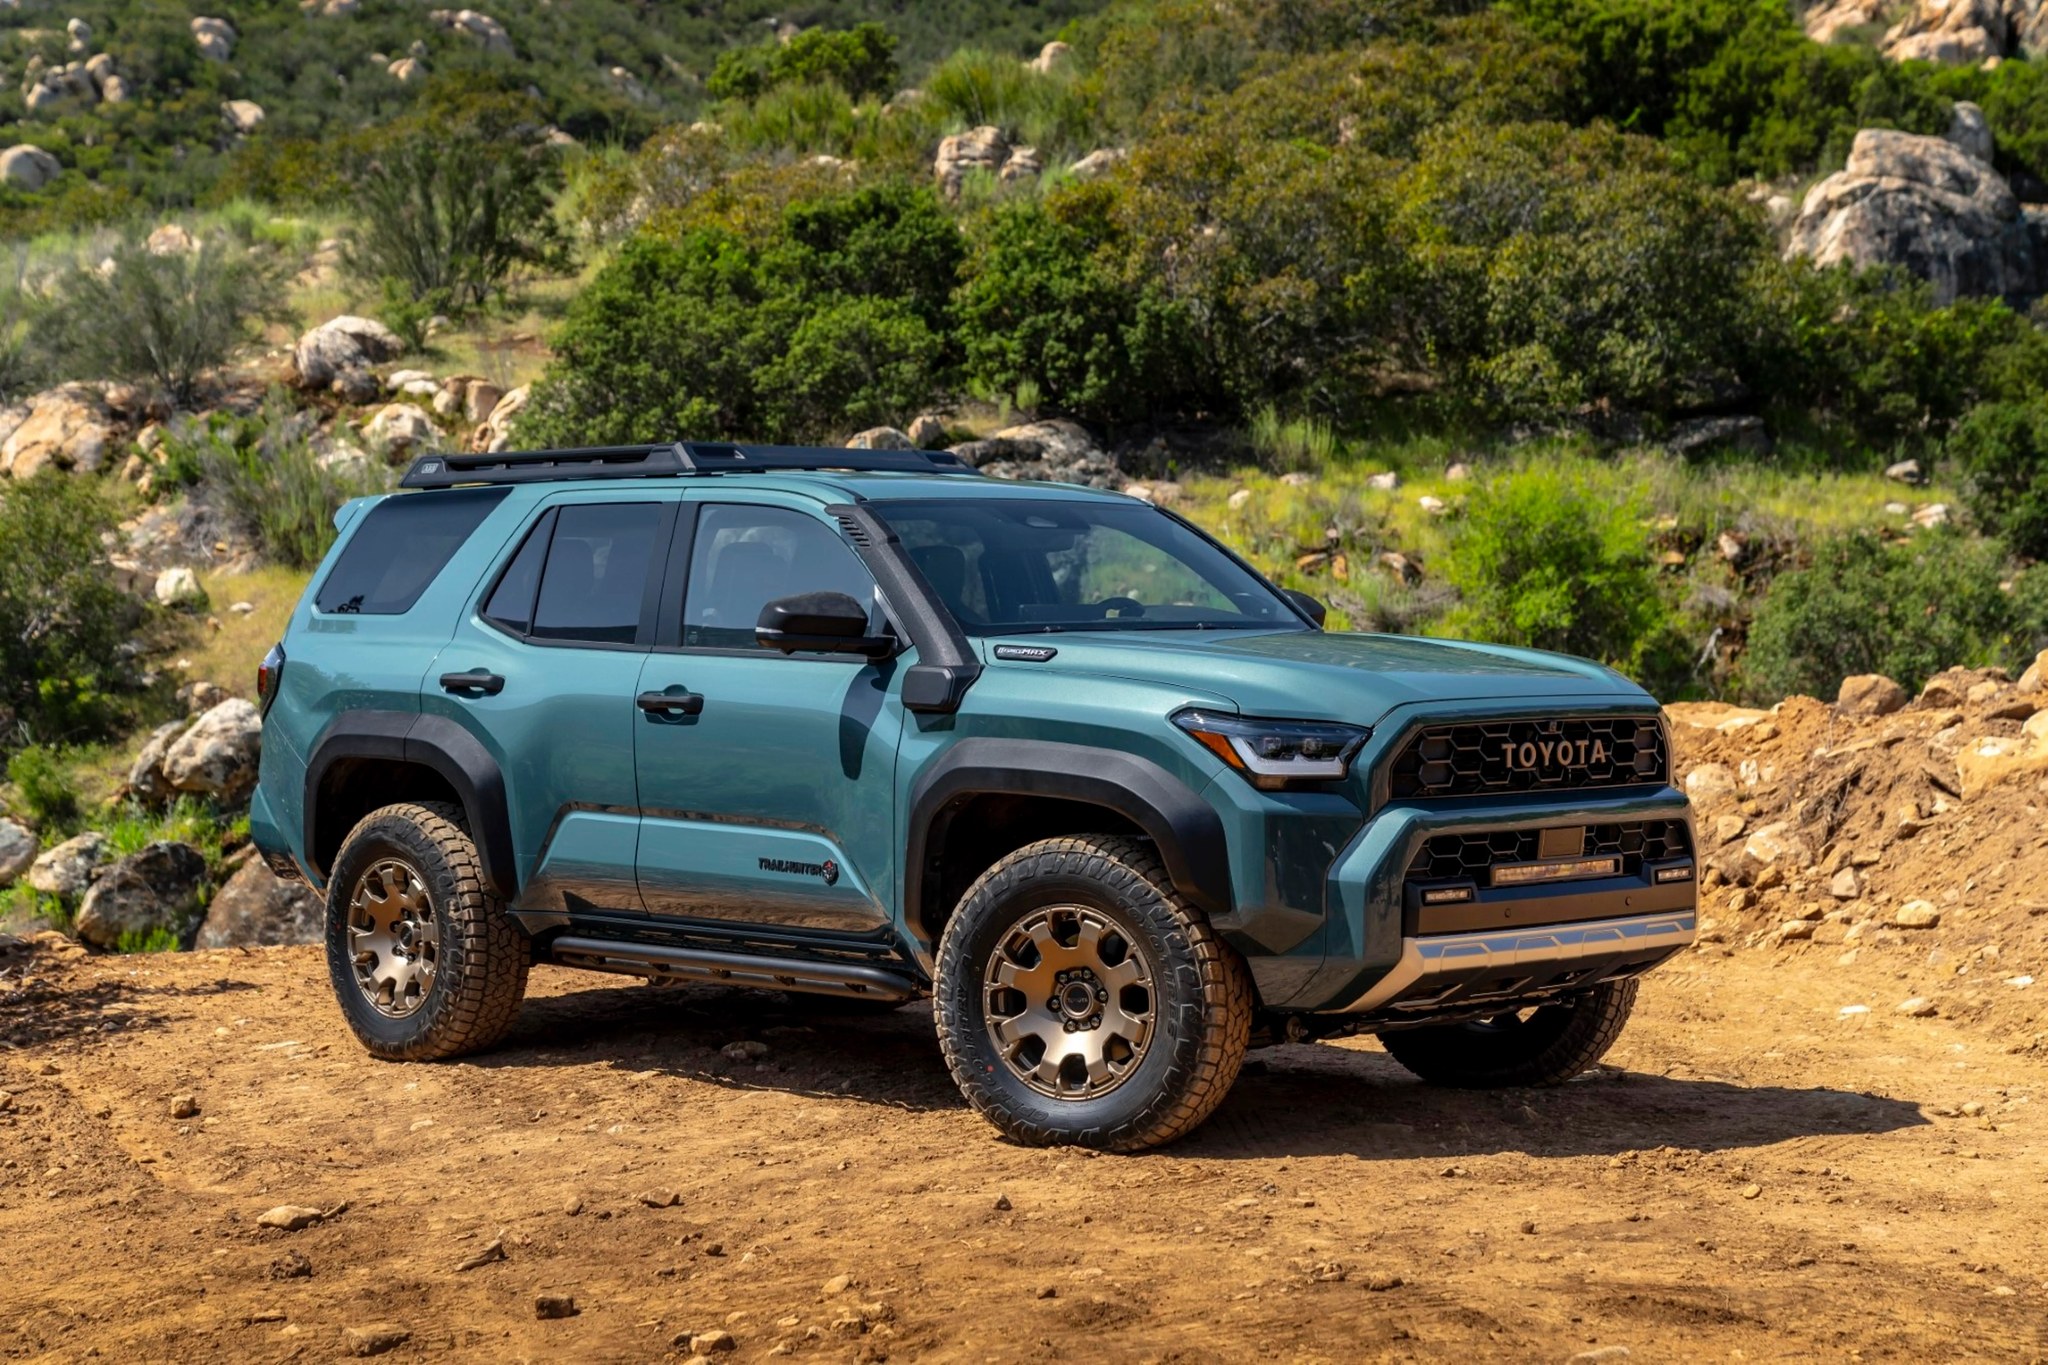 2025 Toyota 4runner 2025 4Runner Photos & Specs! 🔥 Trailhunter, TRD Pro, Off-Road, Limited Trims 2025 Toyota 4Runner Wallpapers 13